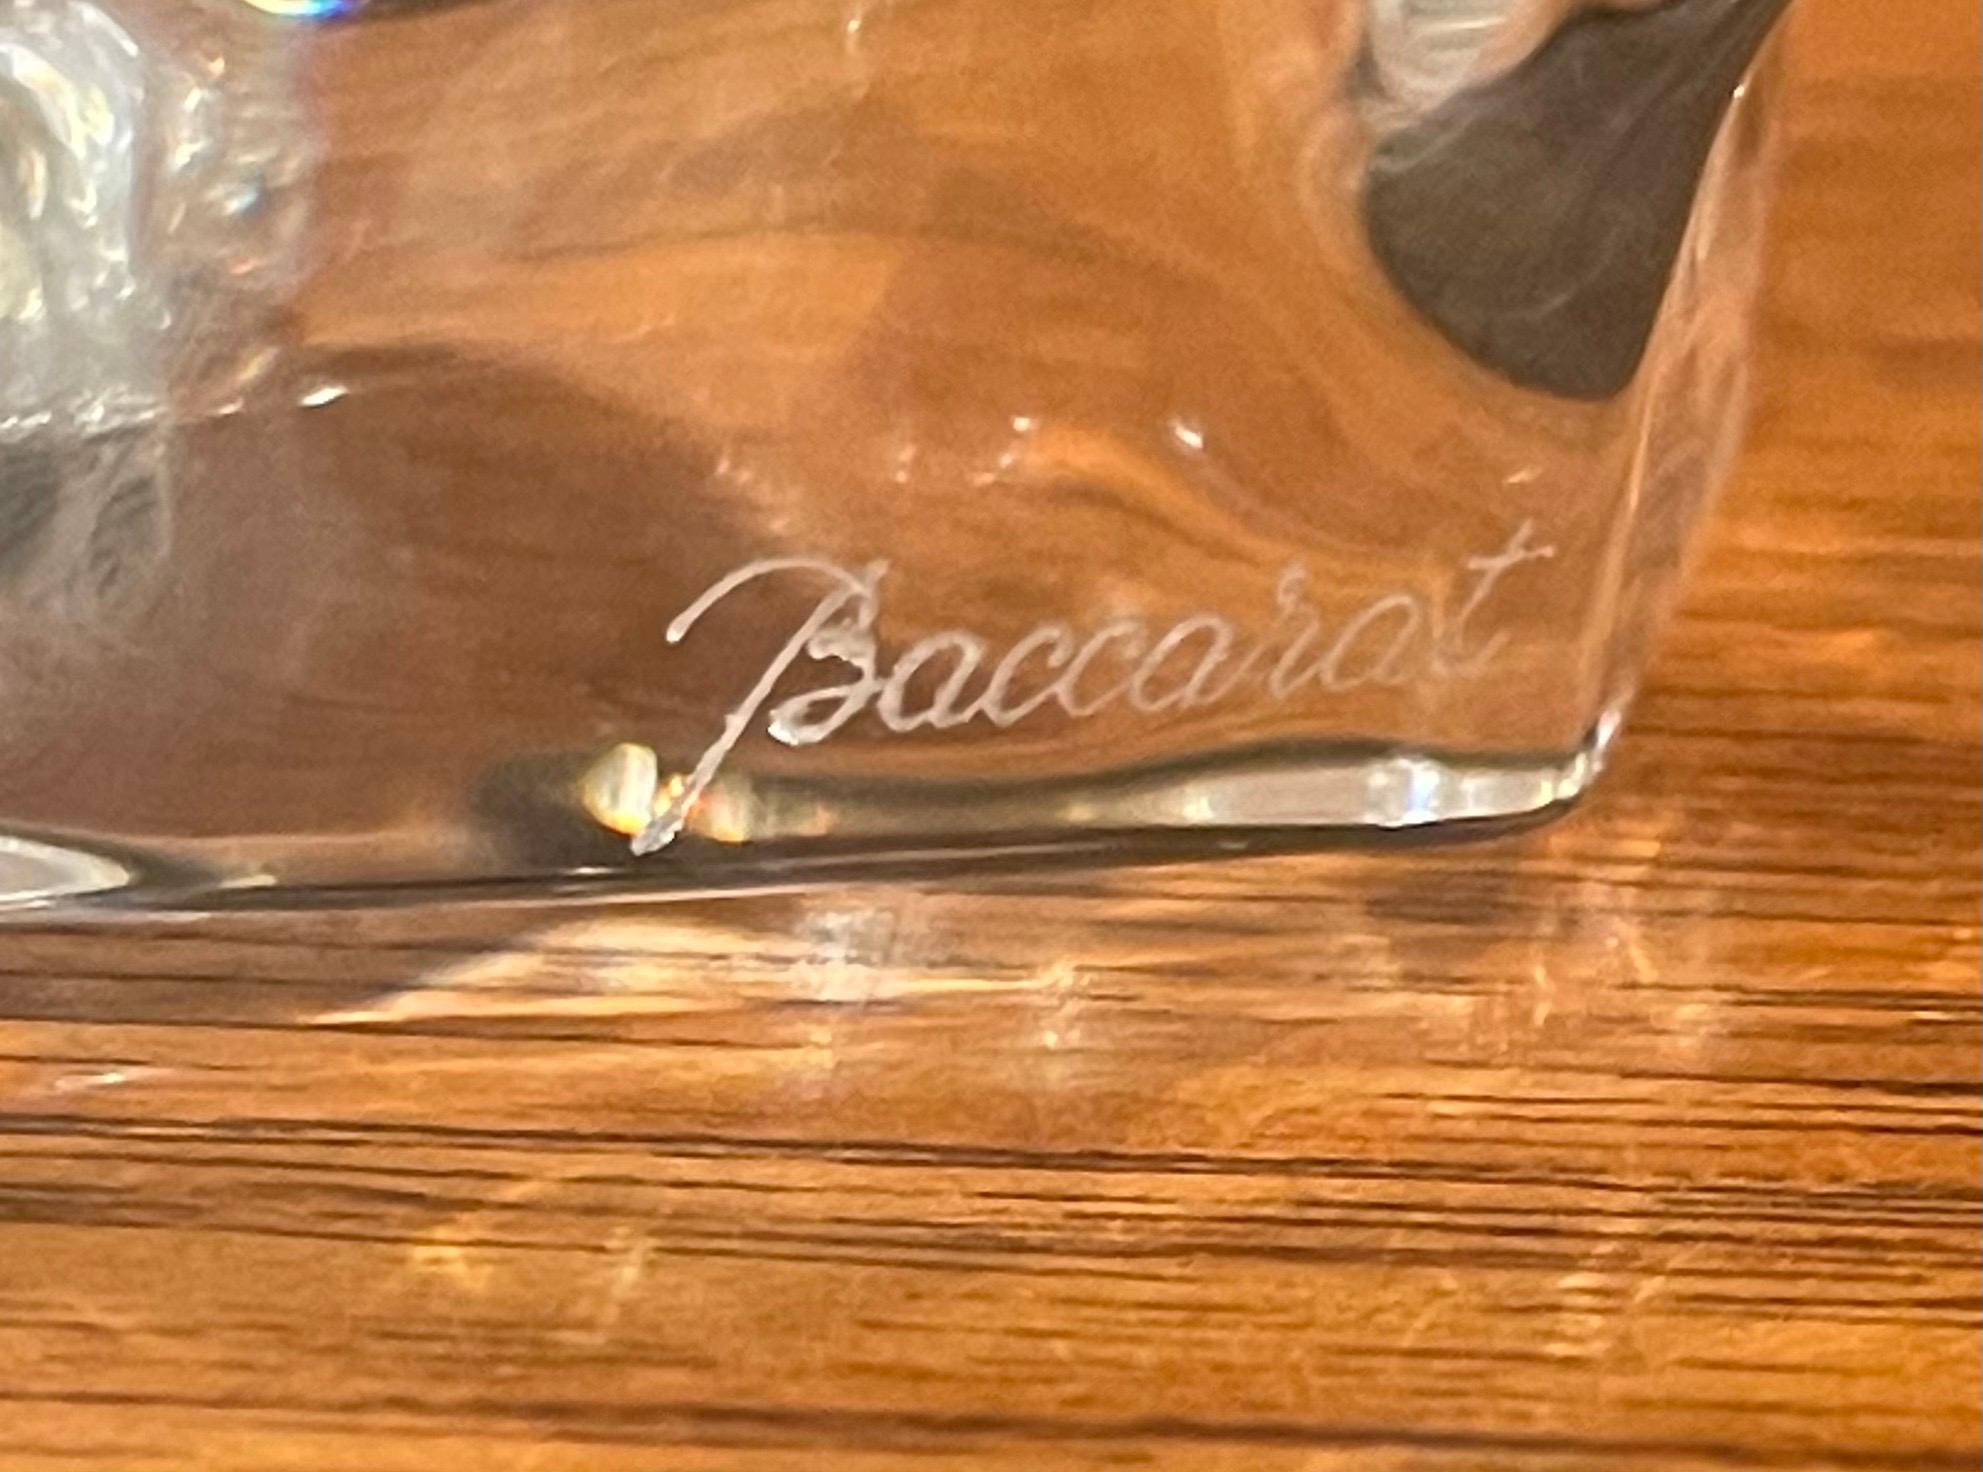 Stylized Crystal Charging Bull Sculpture by Baccarat 3